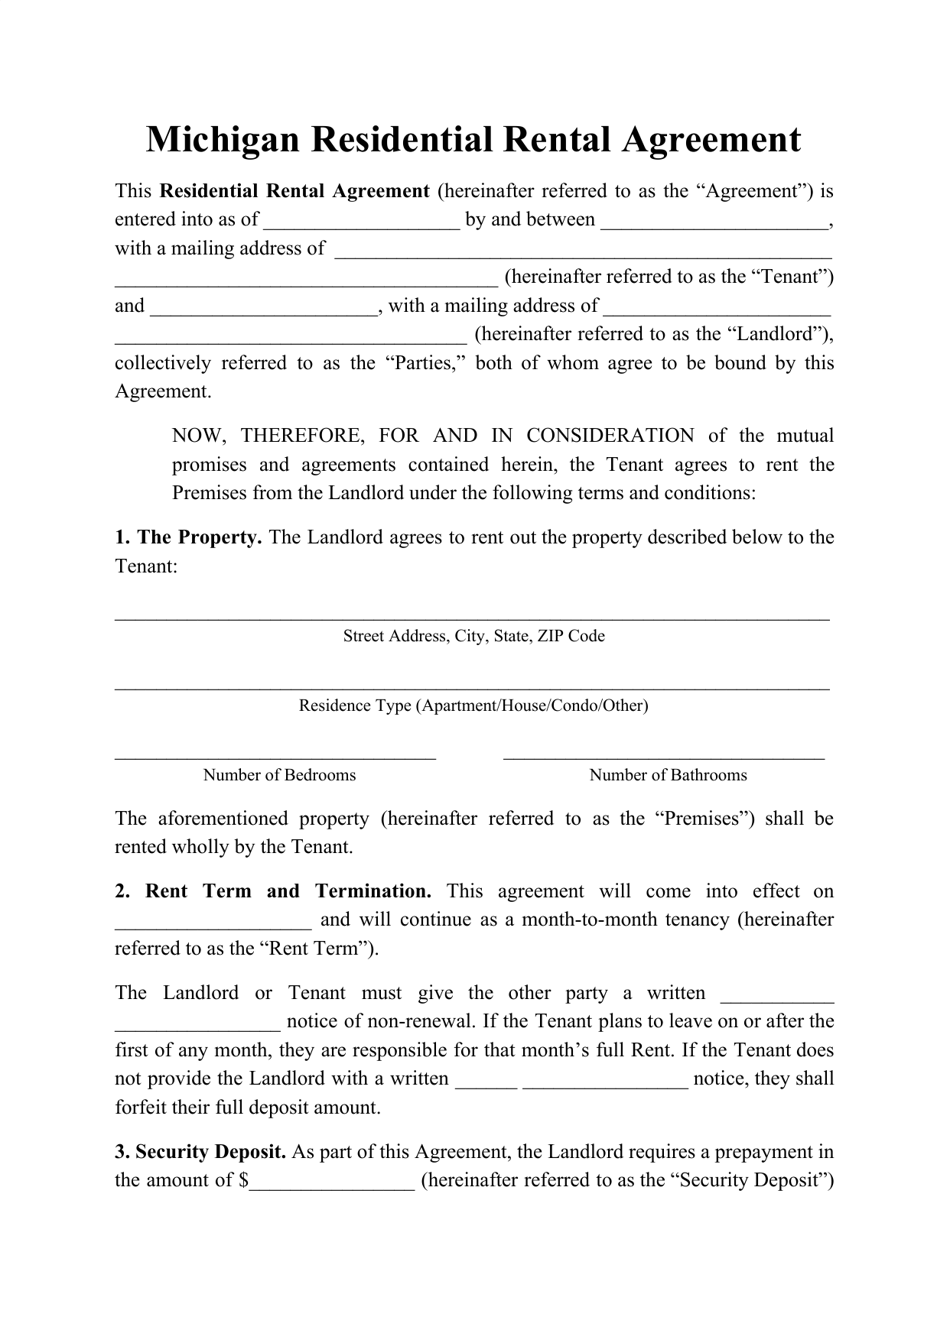 Residential Rental Agreement Template - Michigan, Page 1